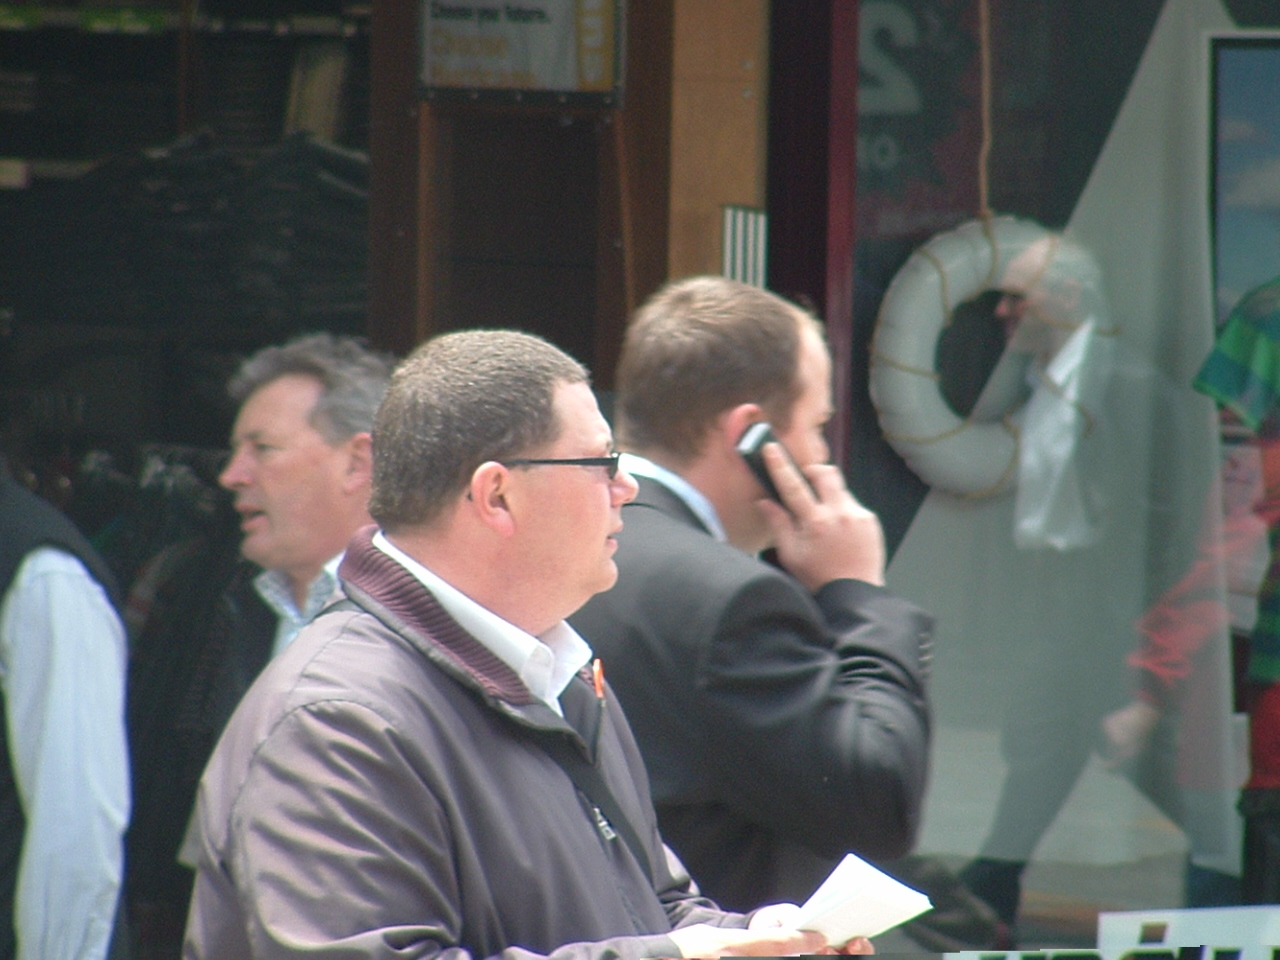 a man talking on a cell phone next to other people